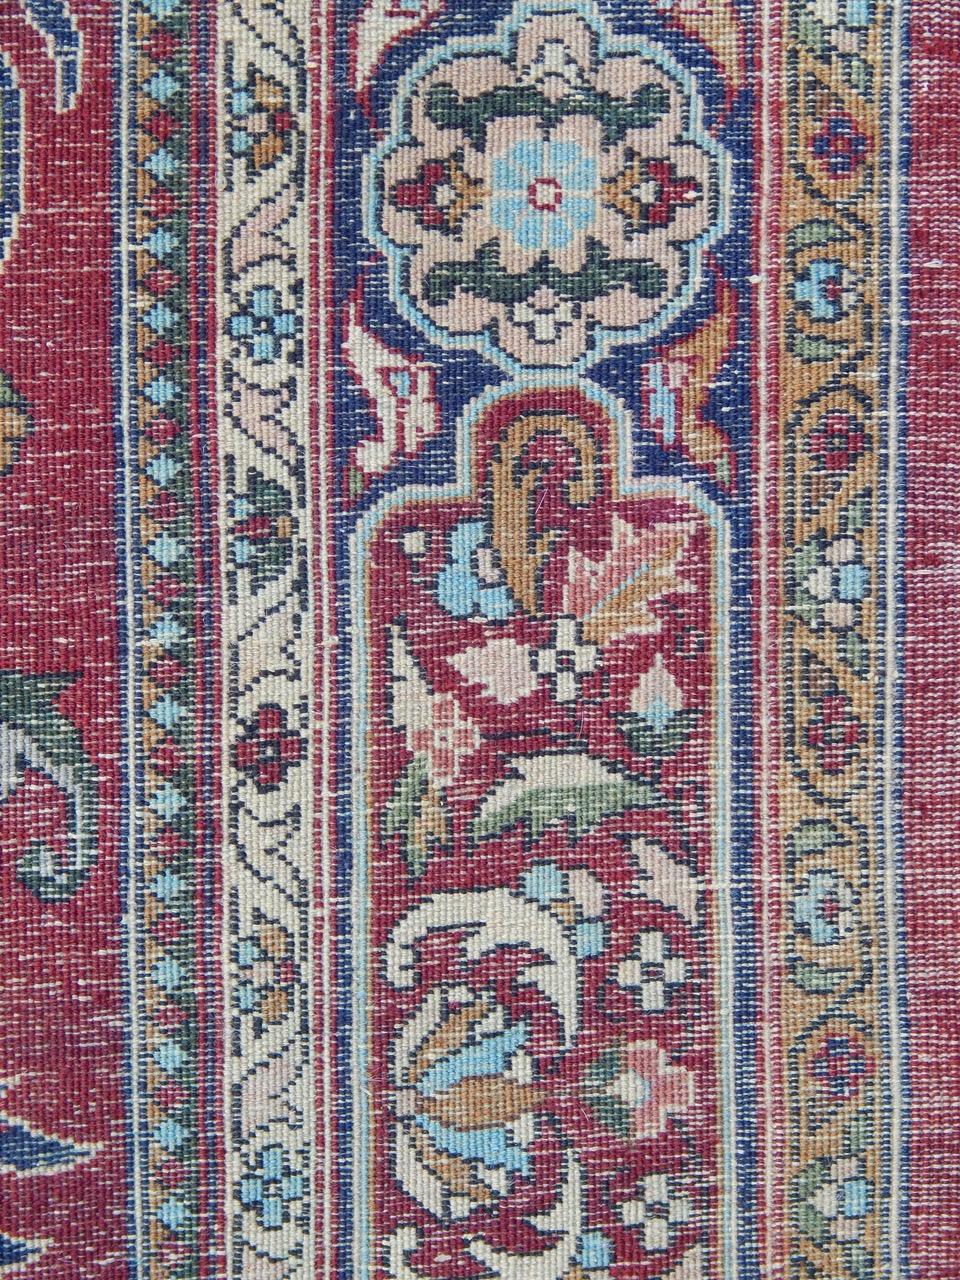 Antique Isfahan Pictorial Rug, Early 20th Century  In Good Condition For Sale In San Francisco, CA